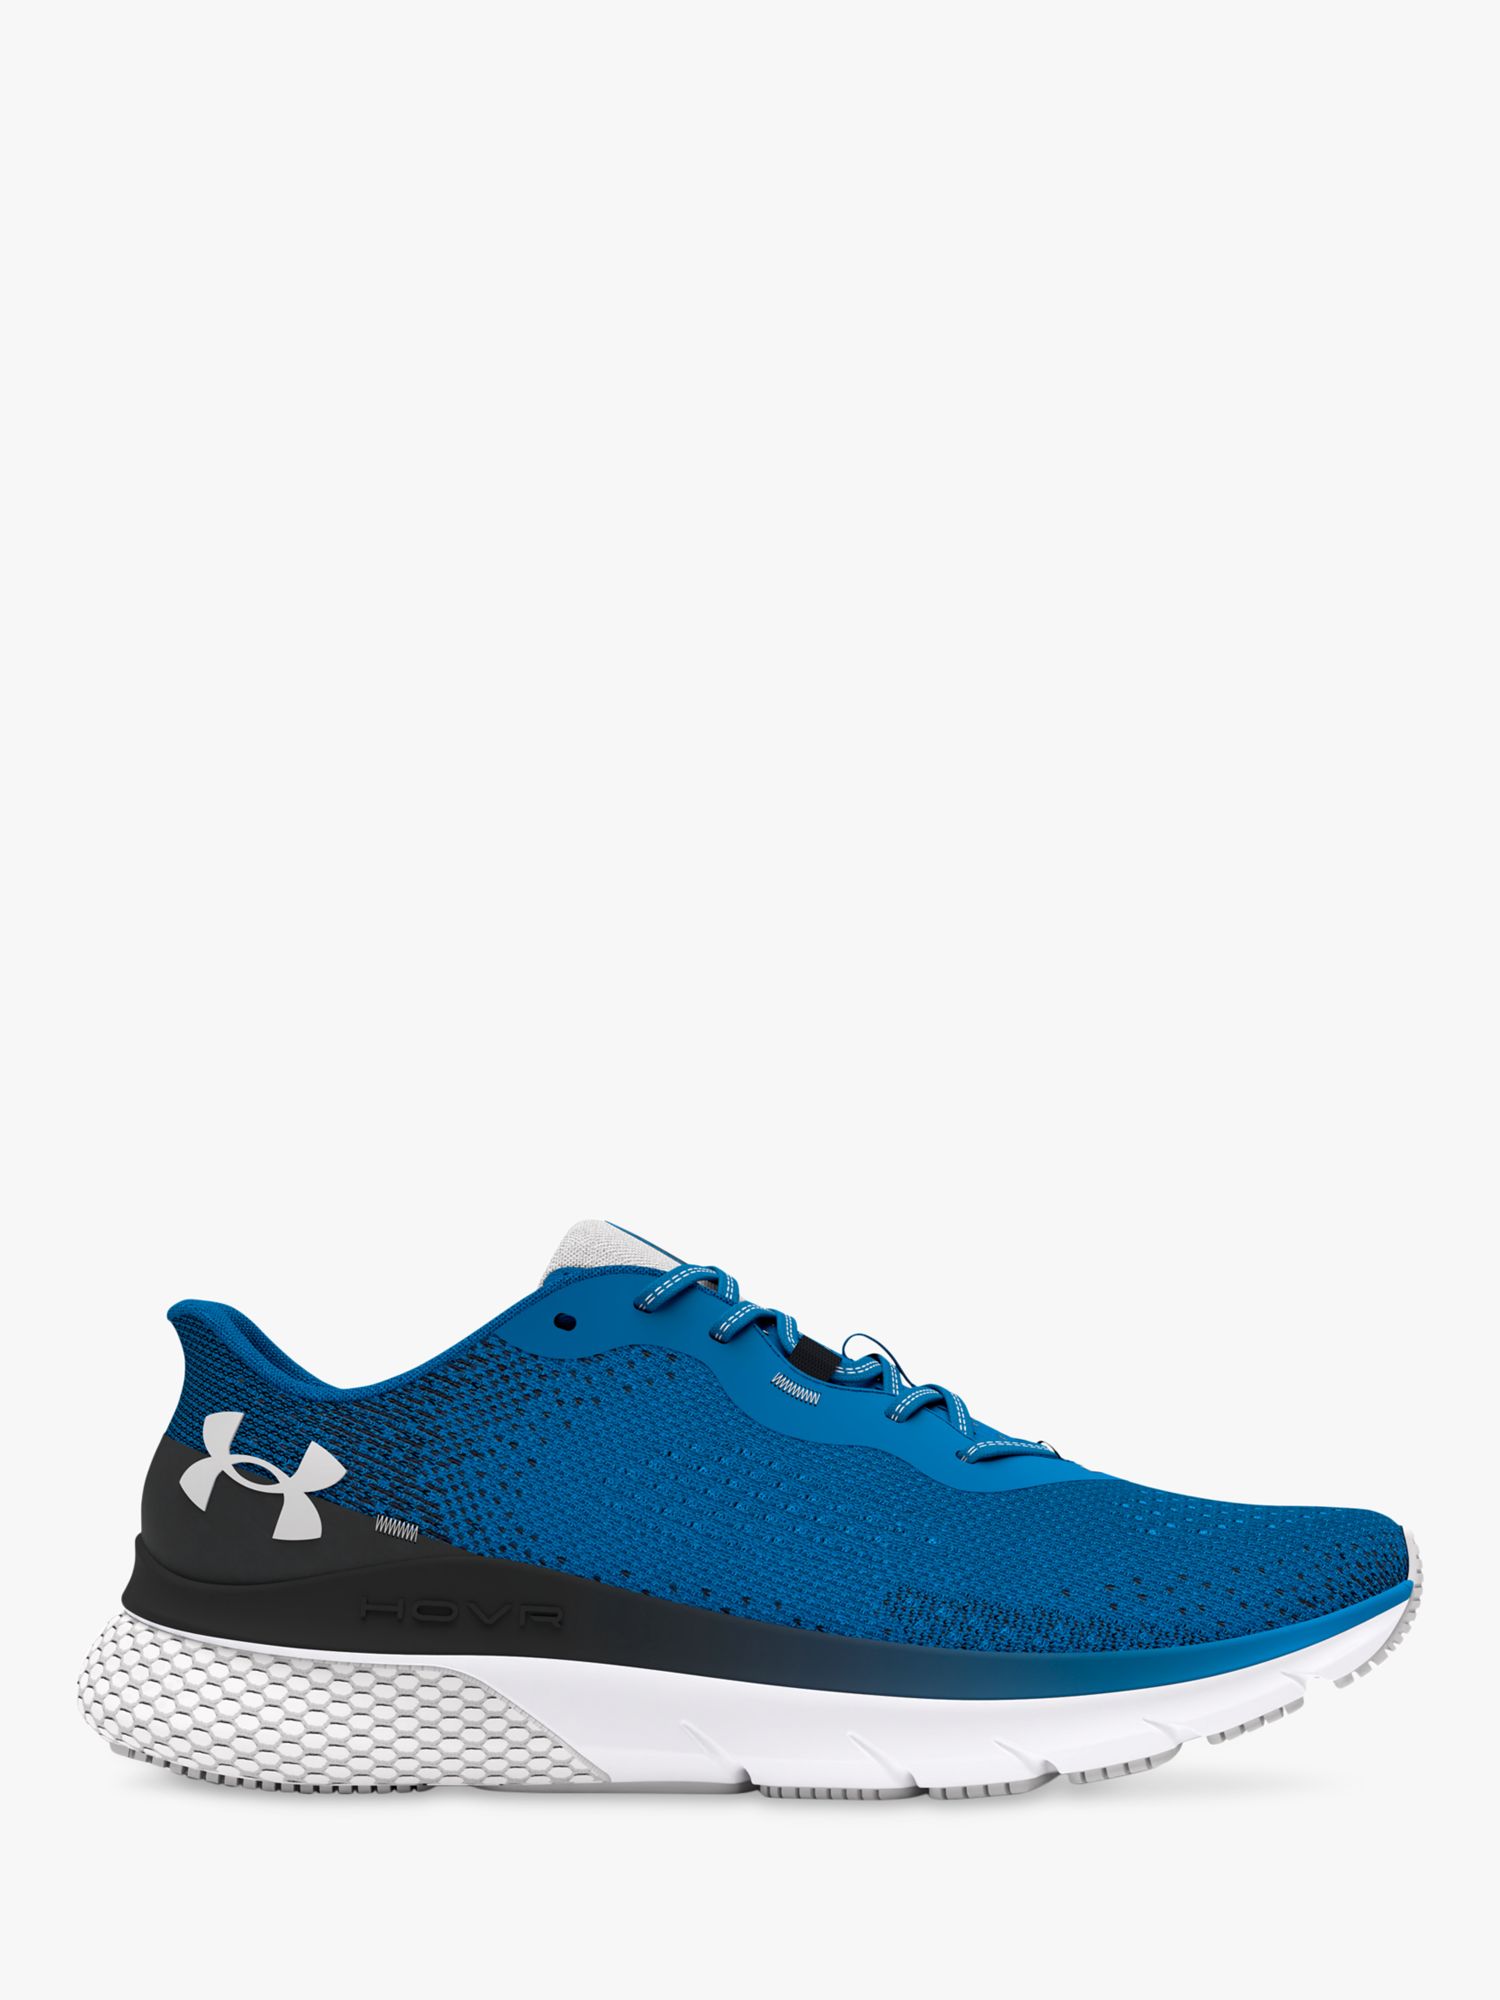 Under Armour Men's HOVR Turbulence 2 Running Shoes, Blue / Black /Gray, 7